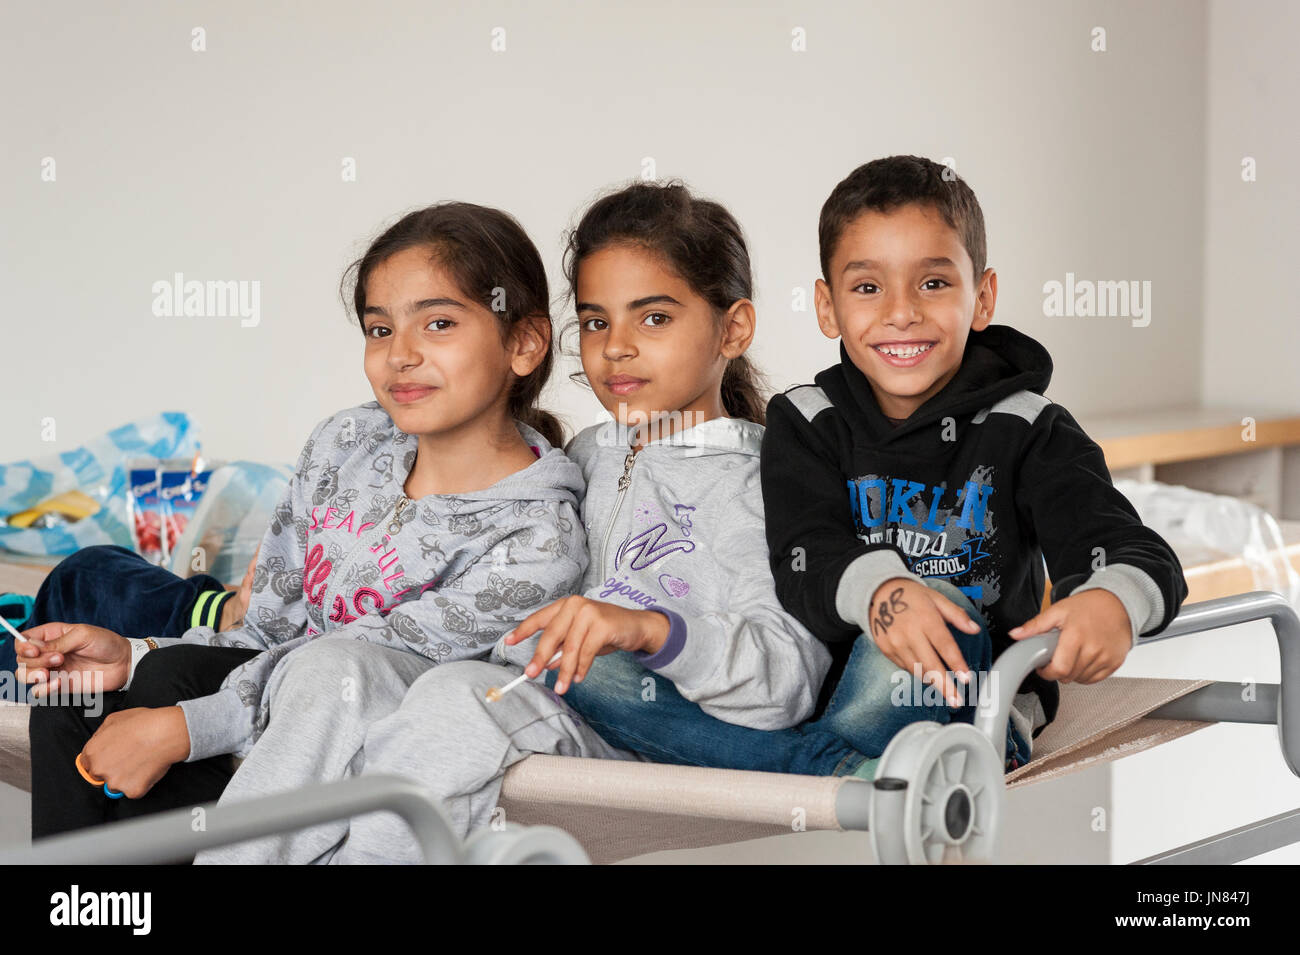 Passau, Germany - August 2th, 2015: Three sisters from Syria at a refugee camp in Passau, Germany. The refugee children are seeking asylum in Europe. Stock Photo